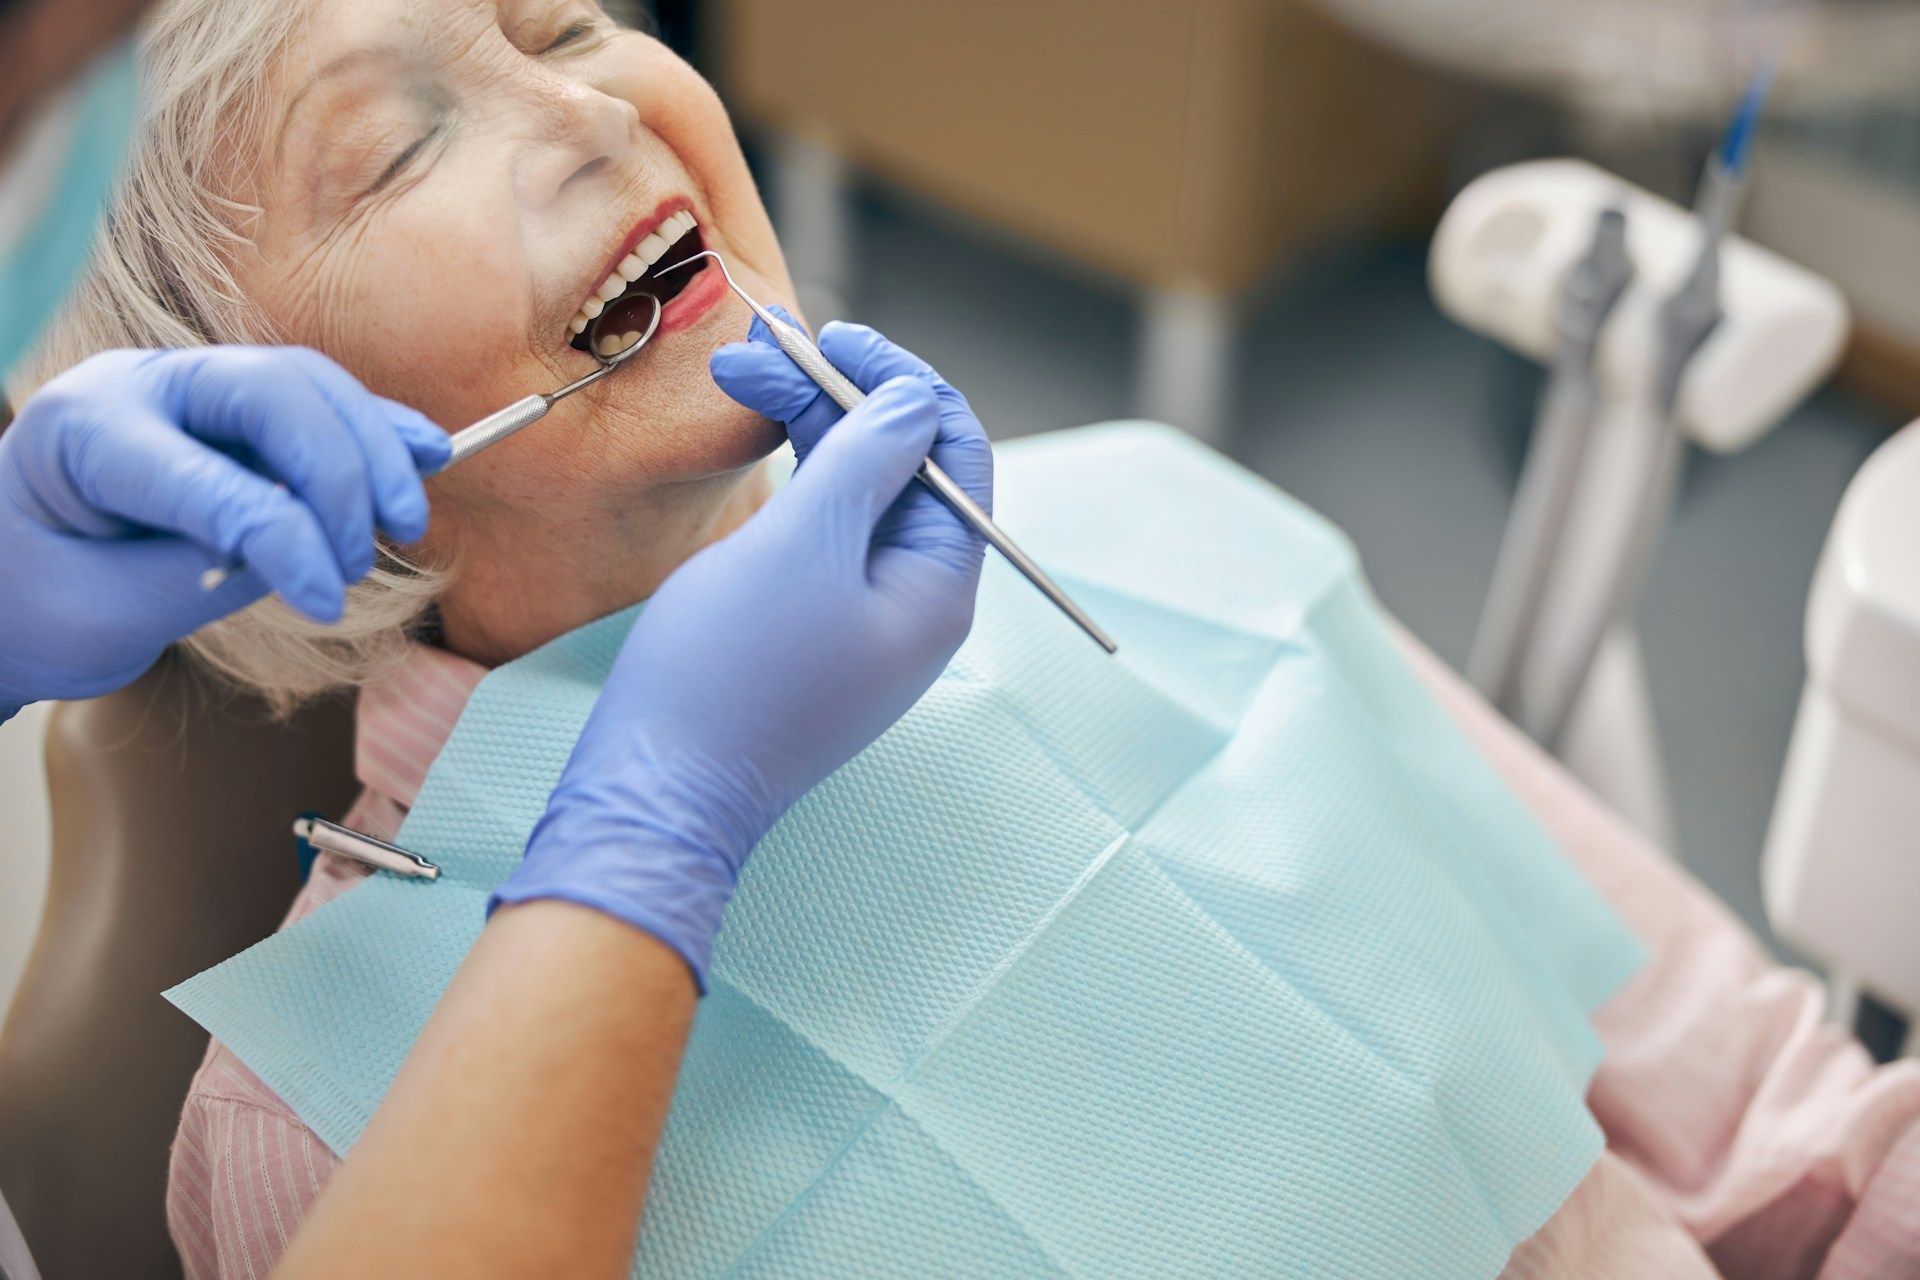 A woman is having her teeth examined for cosmetic dentistry by a dentist.